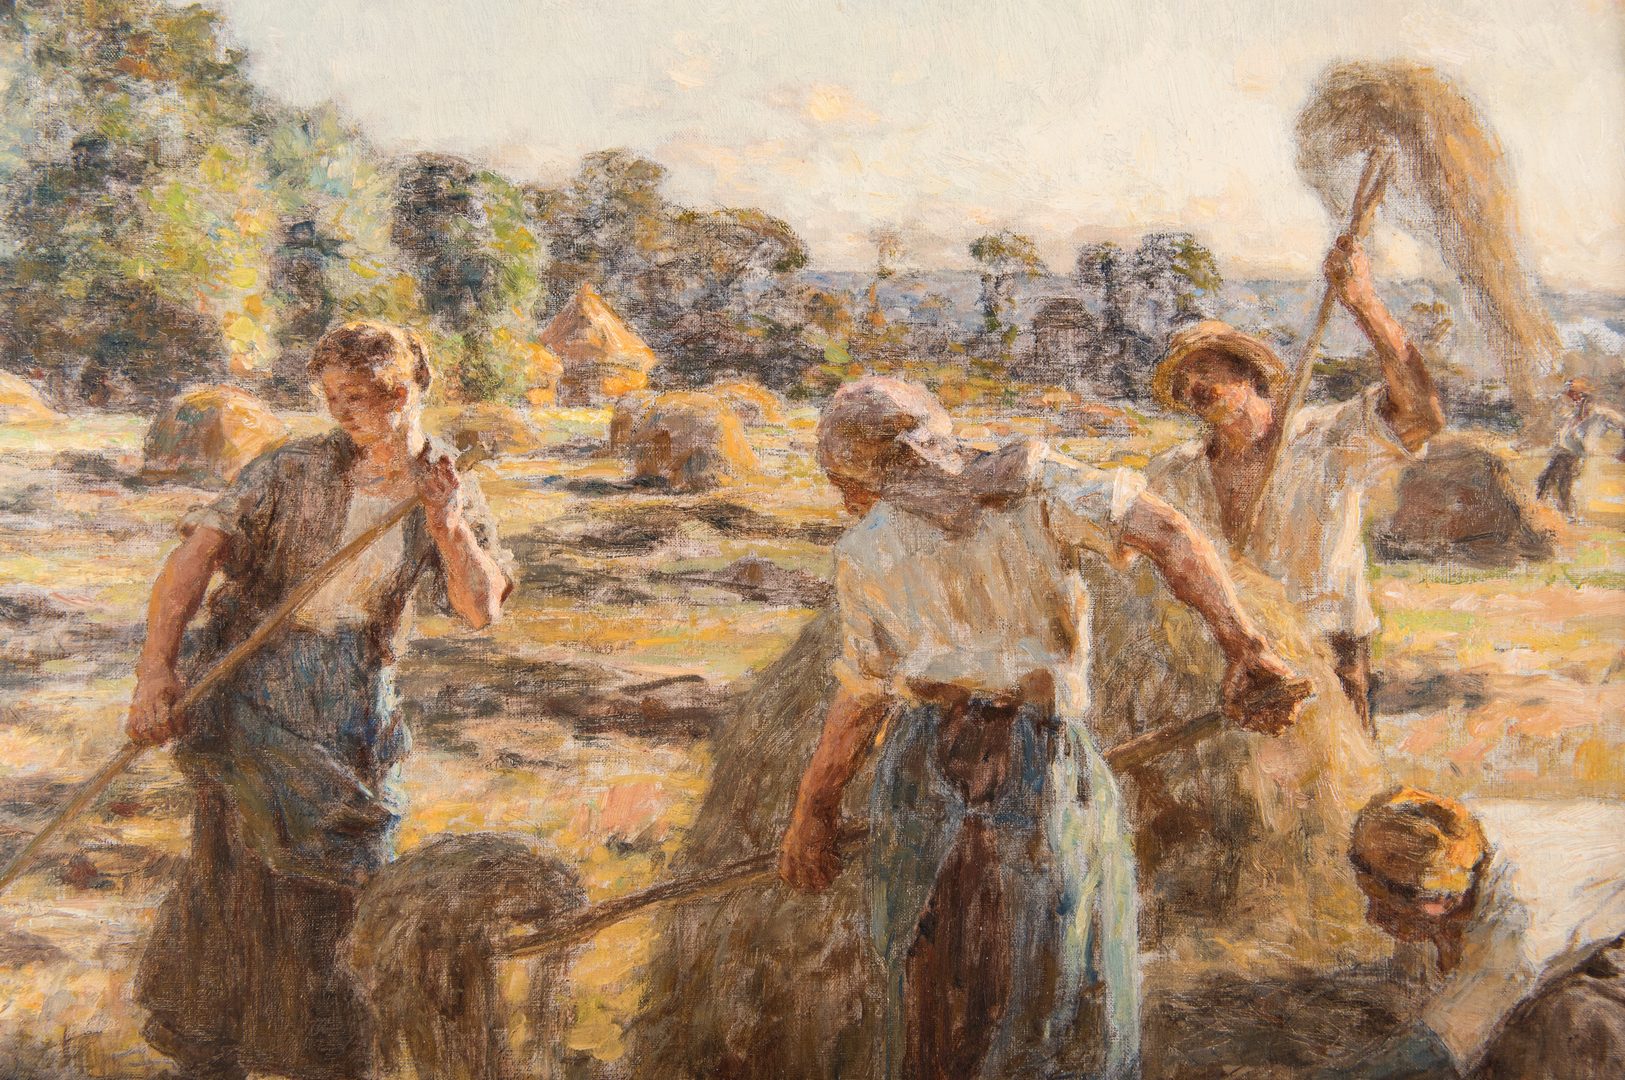 Lot 107: Leon L’Hermitte Oil Painting of Workers in Field